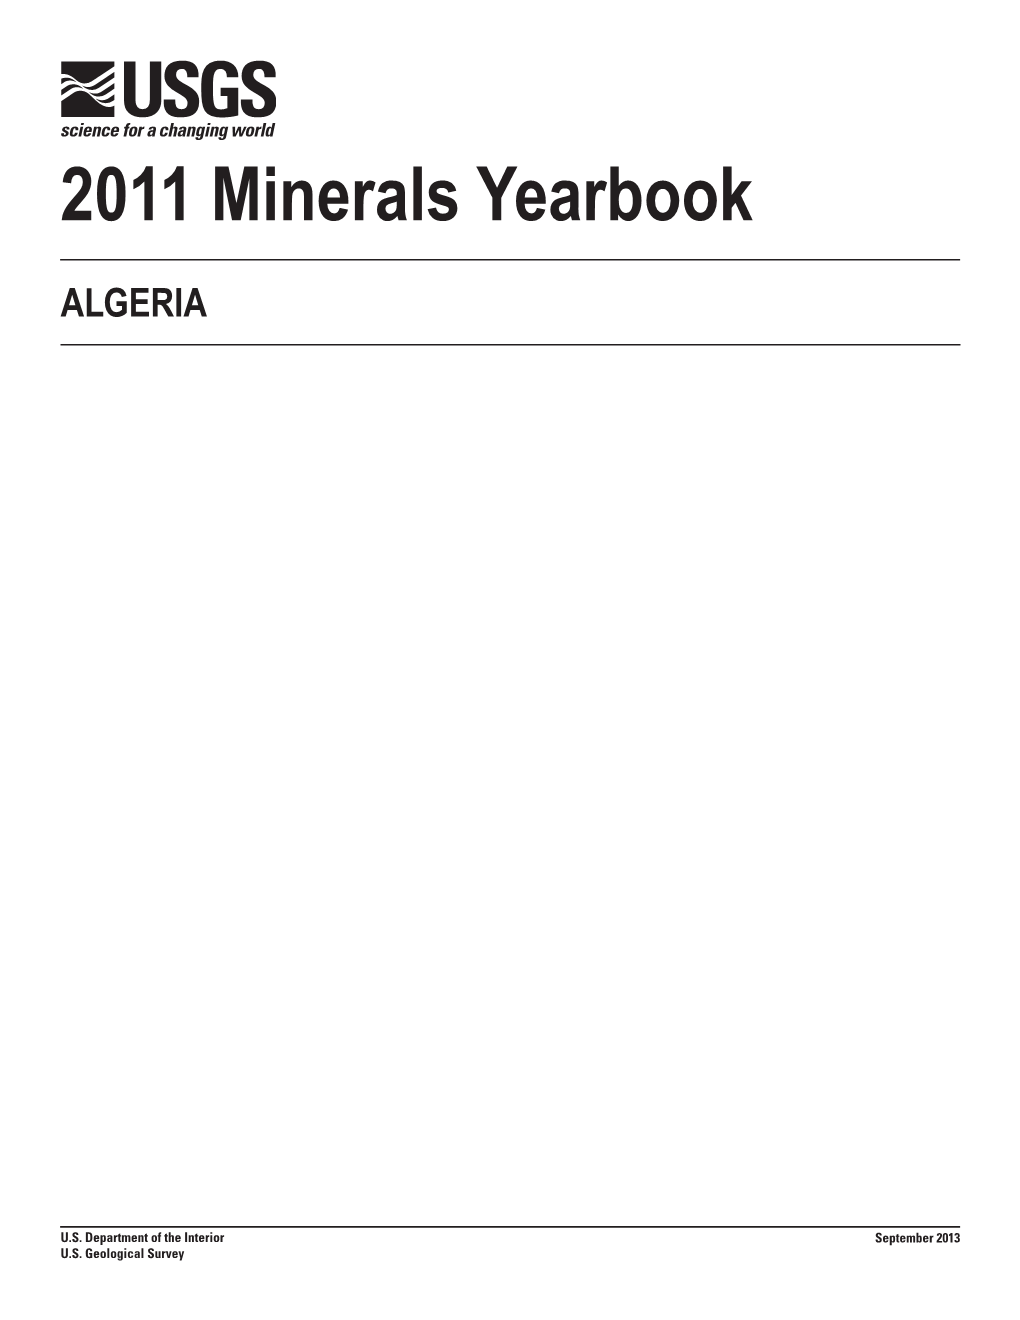 The Mineral Industry of Algeria in 2011